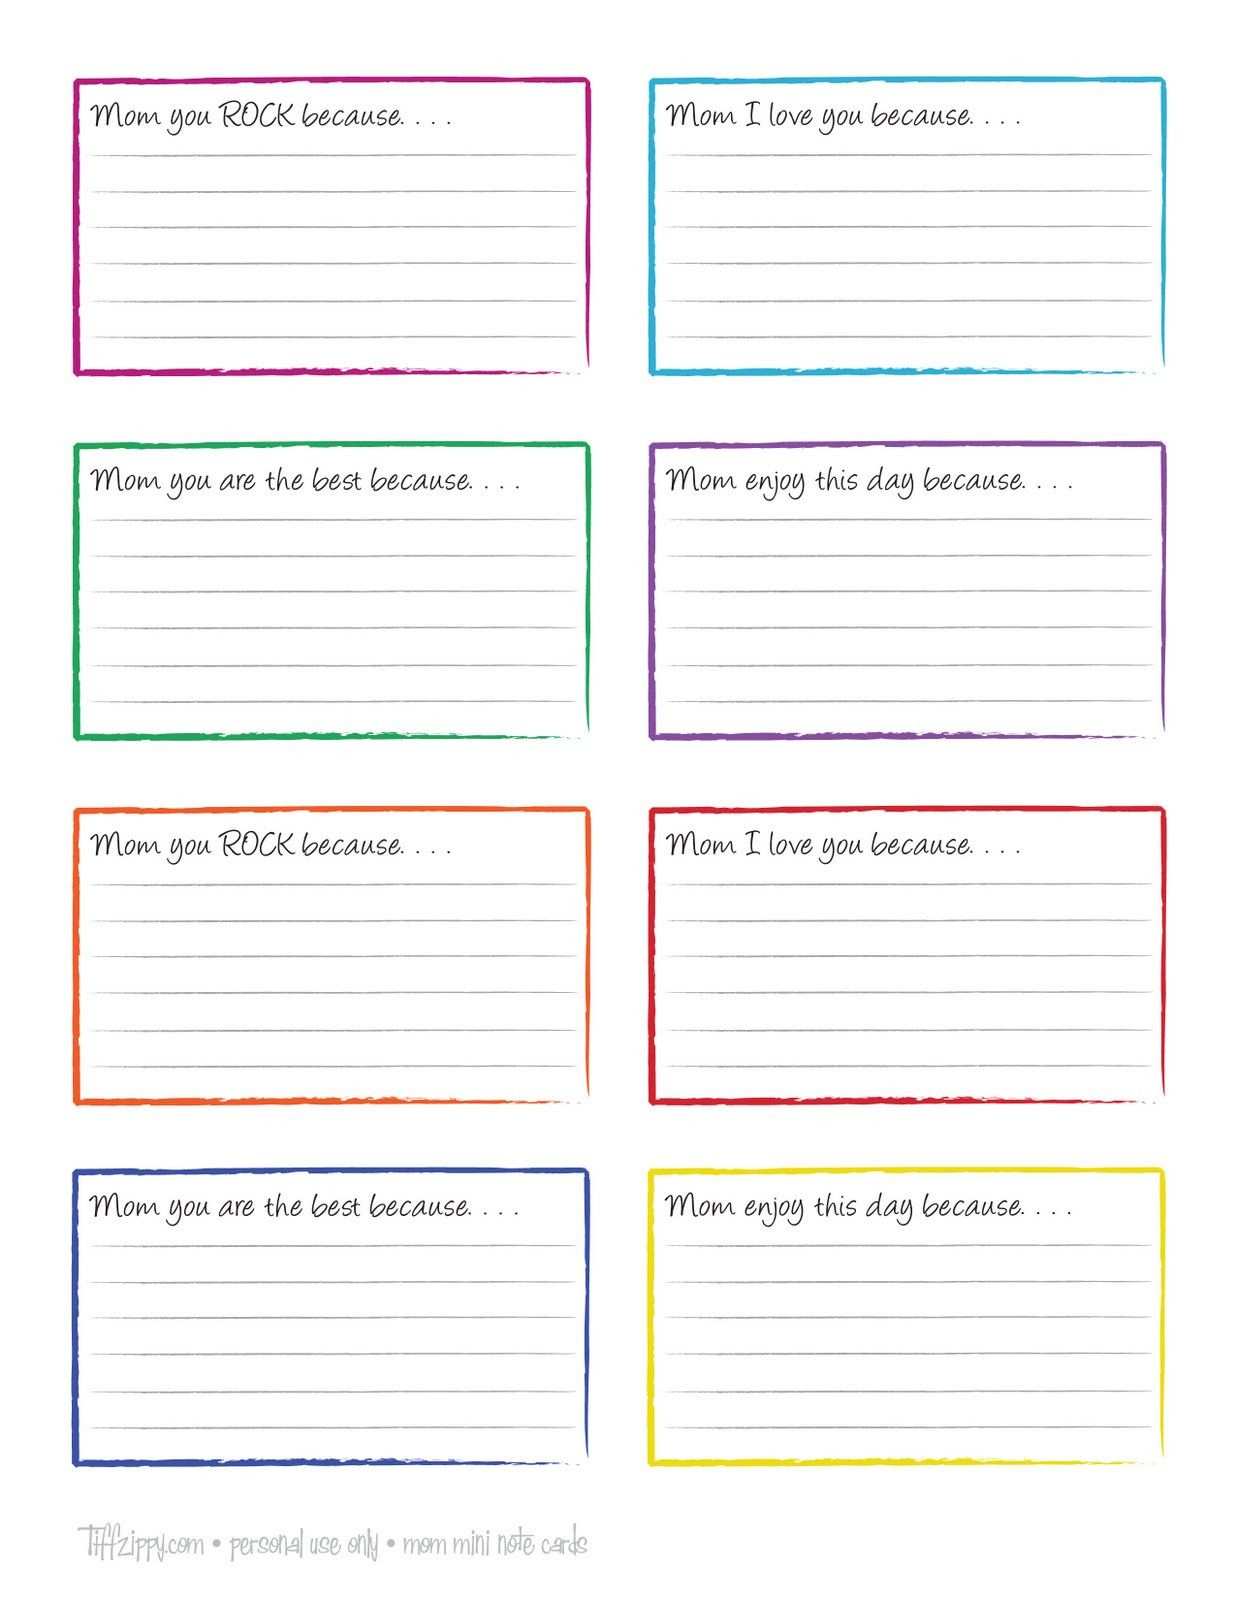 52 Standard 4 X 6 Index Card Template Word in Photoshop for 4 X 6 Index Card Template Word